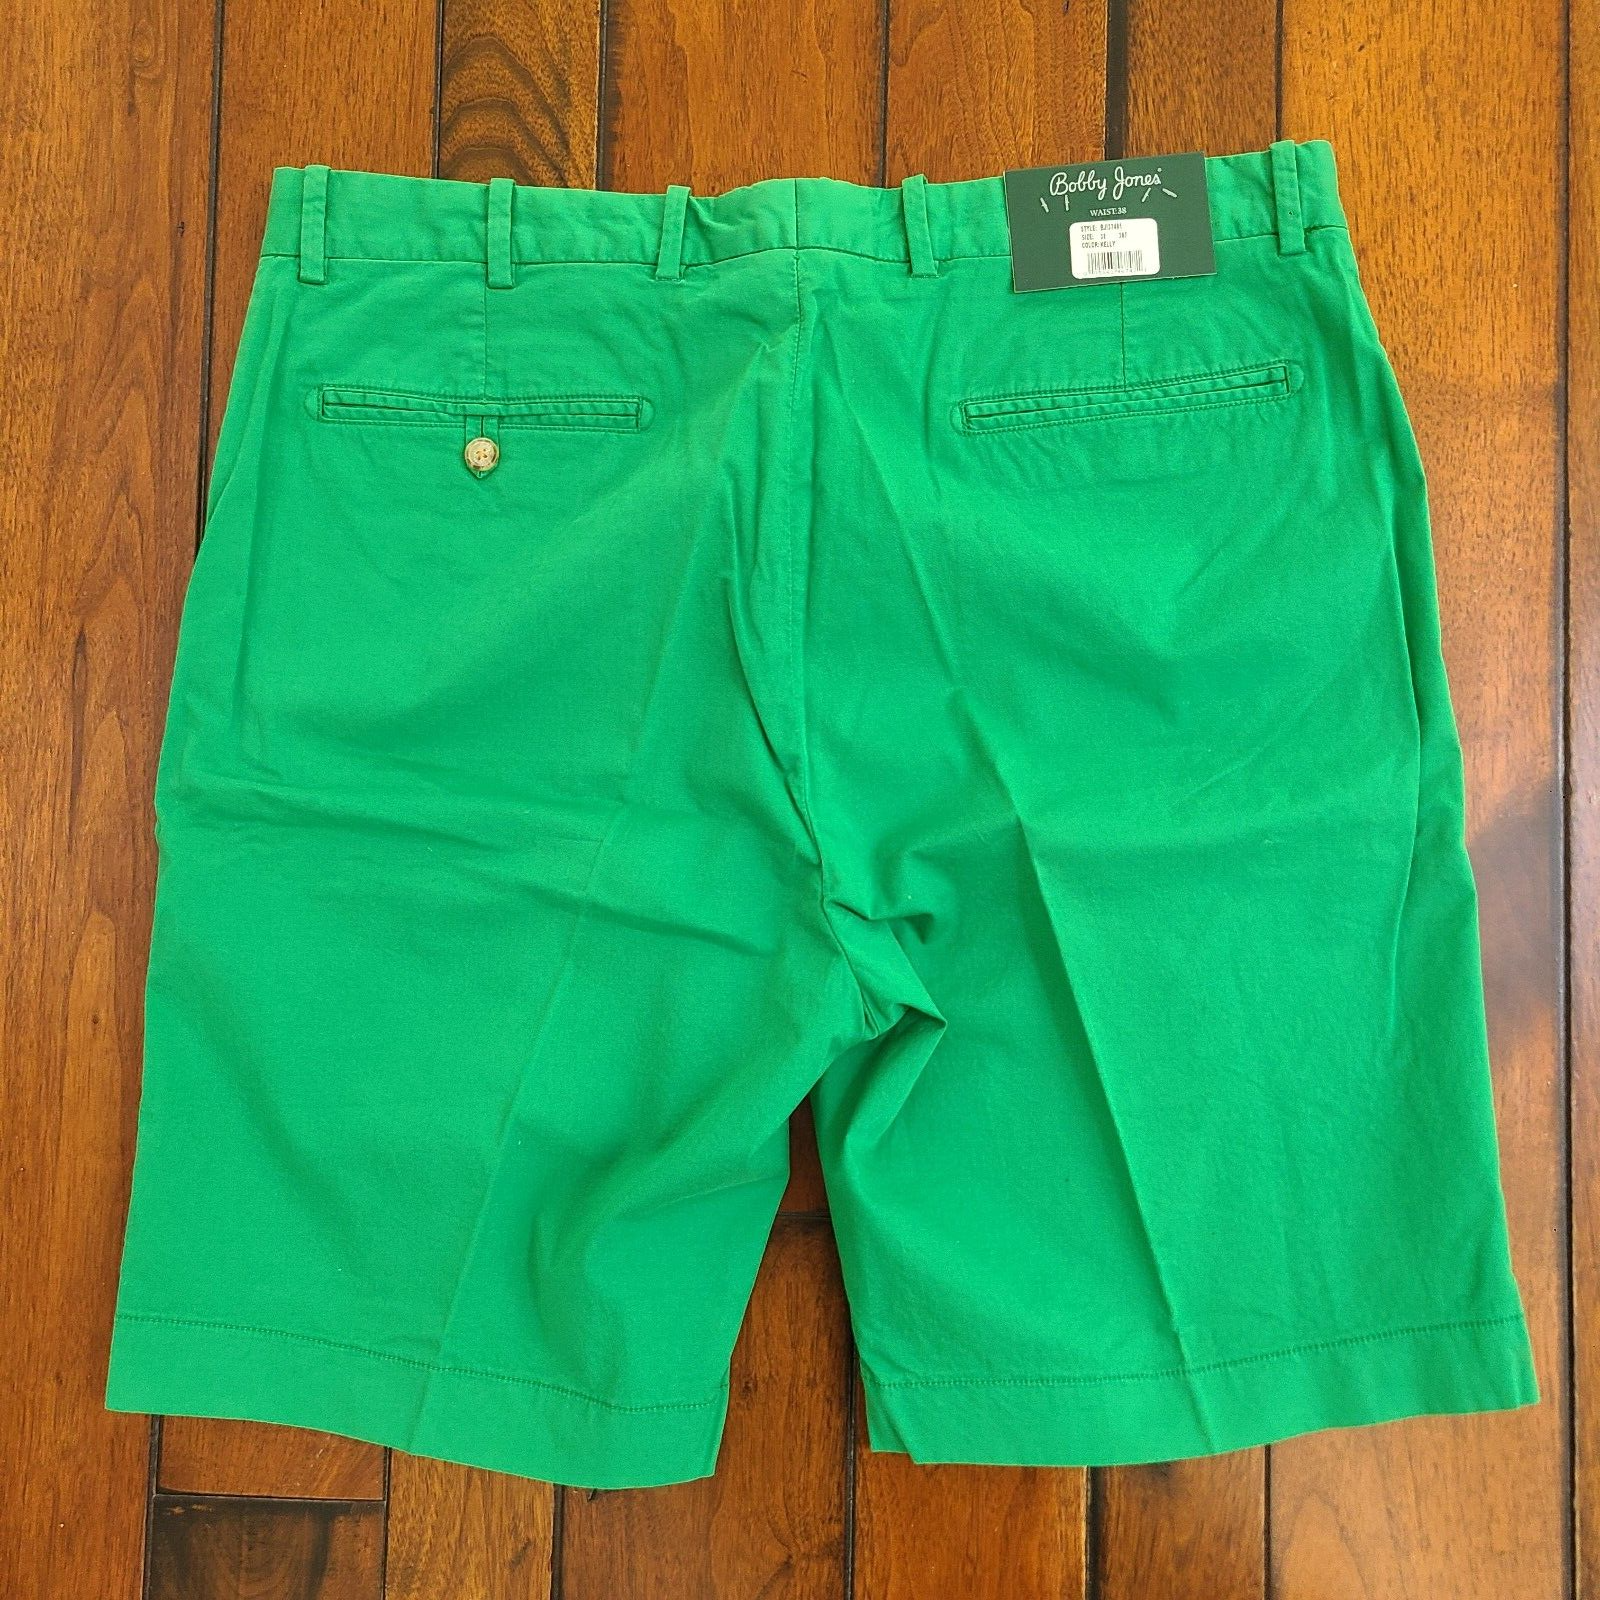 Primary image for BOBBY JONES Golf Shorts Men's 38 Green Cotton Stretch 21" Flat Front $120 NEW